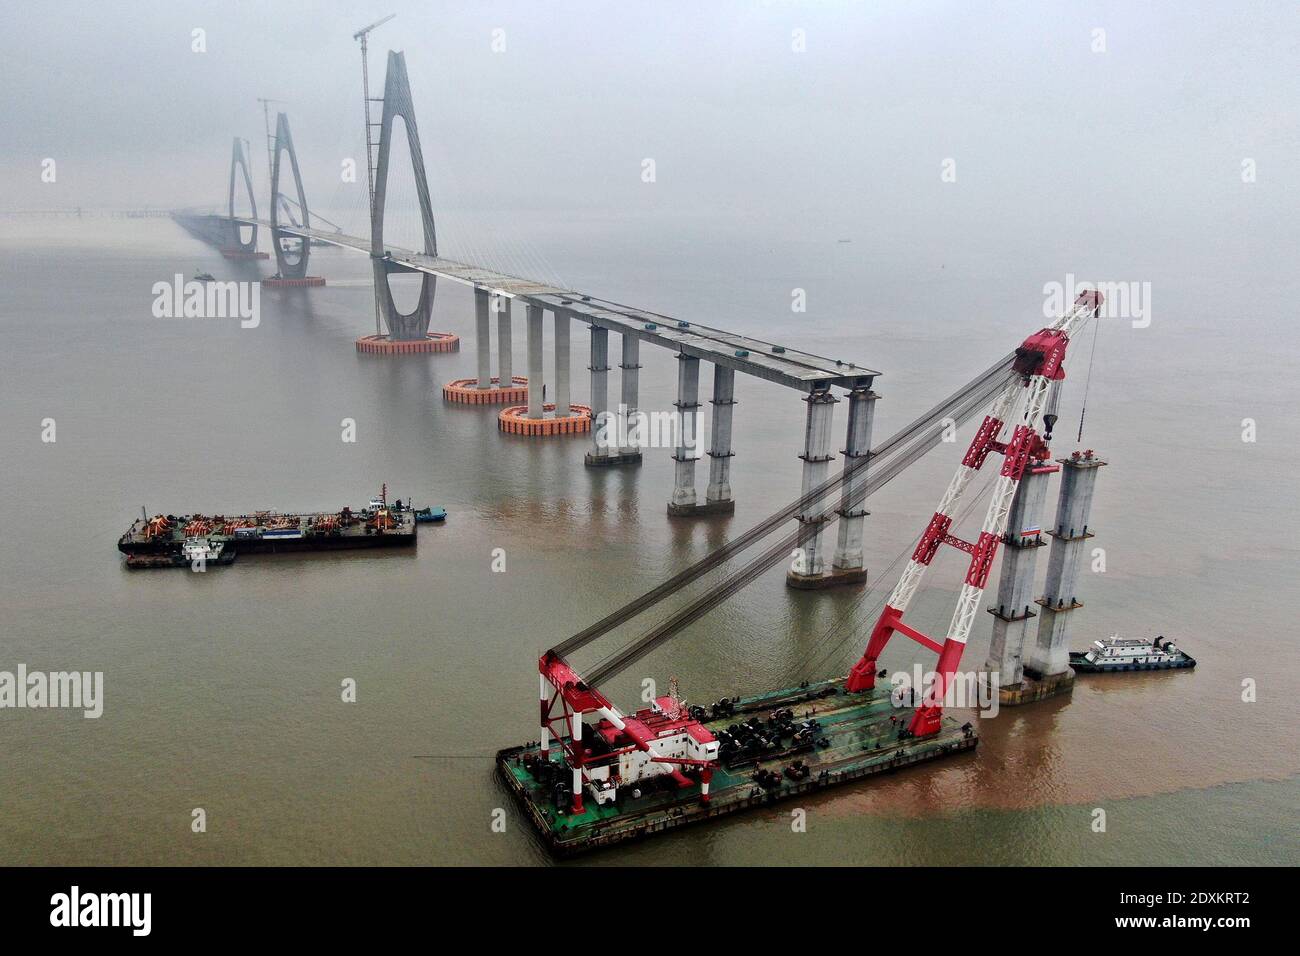 An aerial view of cranes standing on boats erecting piers of the Zhoudai Bridge, Zhoushan city, east China’s Zhejiang province, 23 December 2020. The Stock Photo